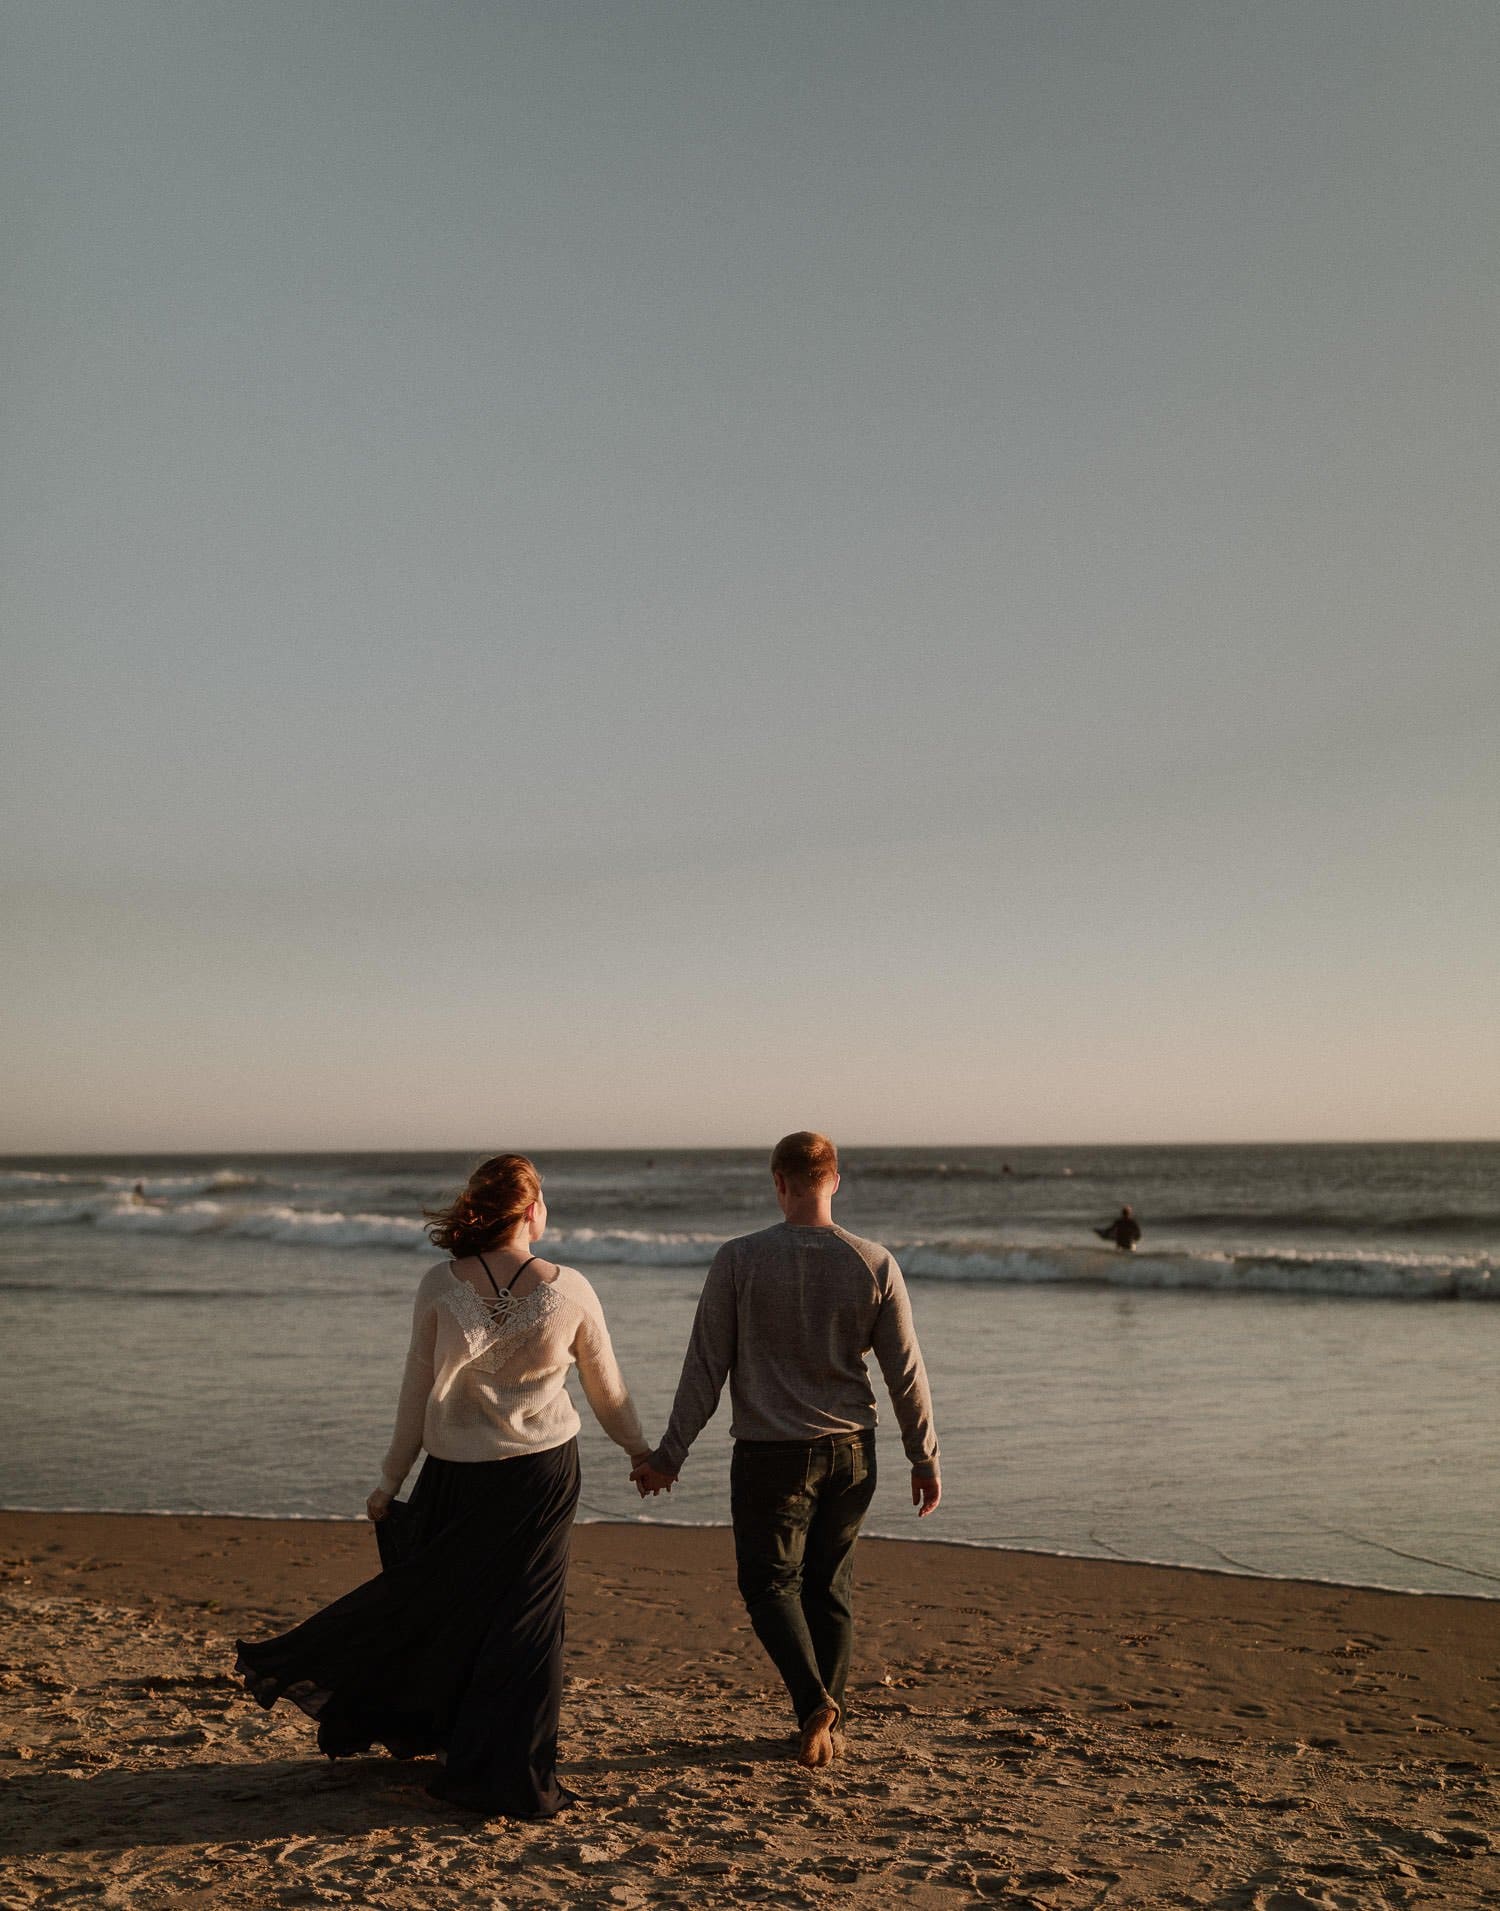 Groom holds brides hand as they walk along the beach at sunset after their elopement ceremony. The waves slowly roll over the sand